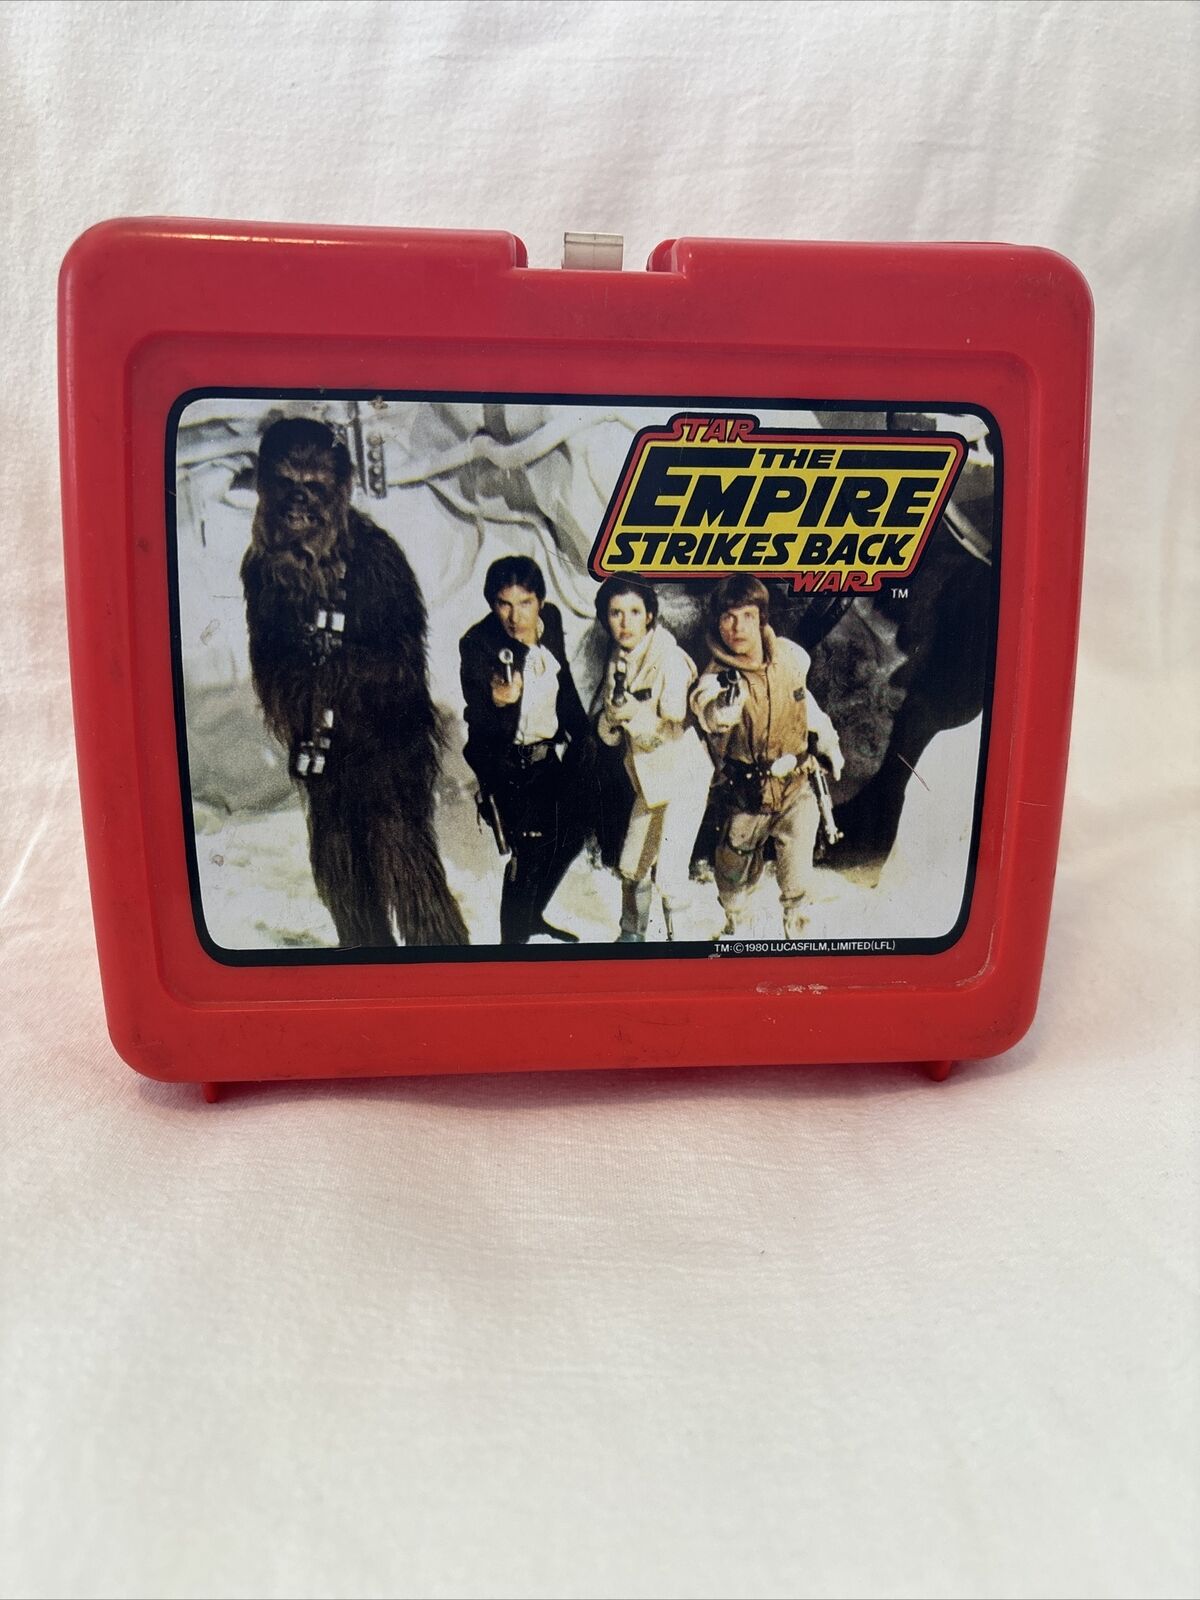 Vintage Star Wars The Empire Strikes Back Red Plastic Lunchbox ONLY (1980)